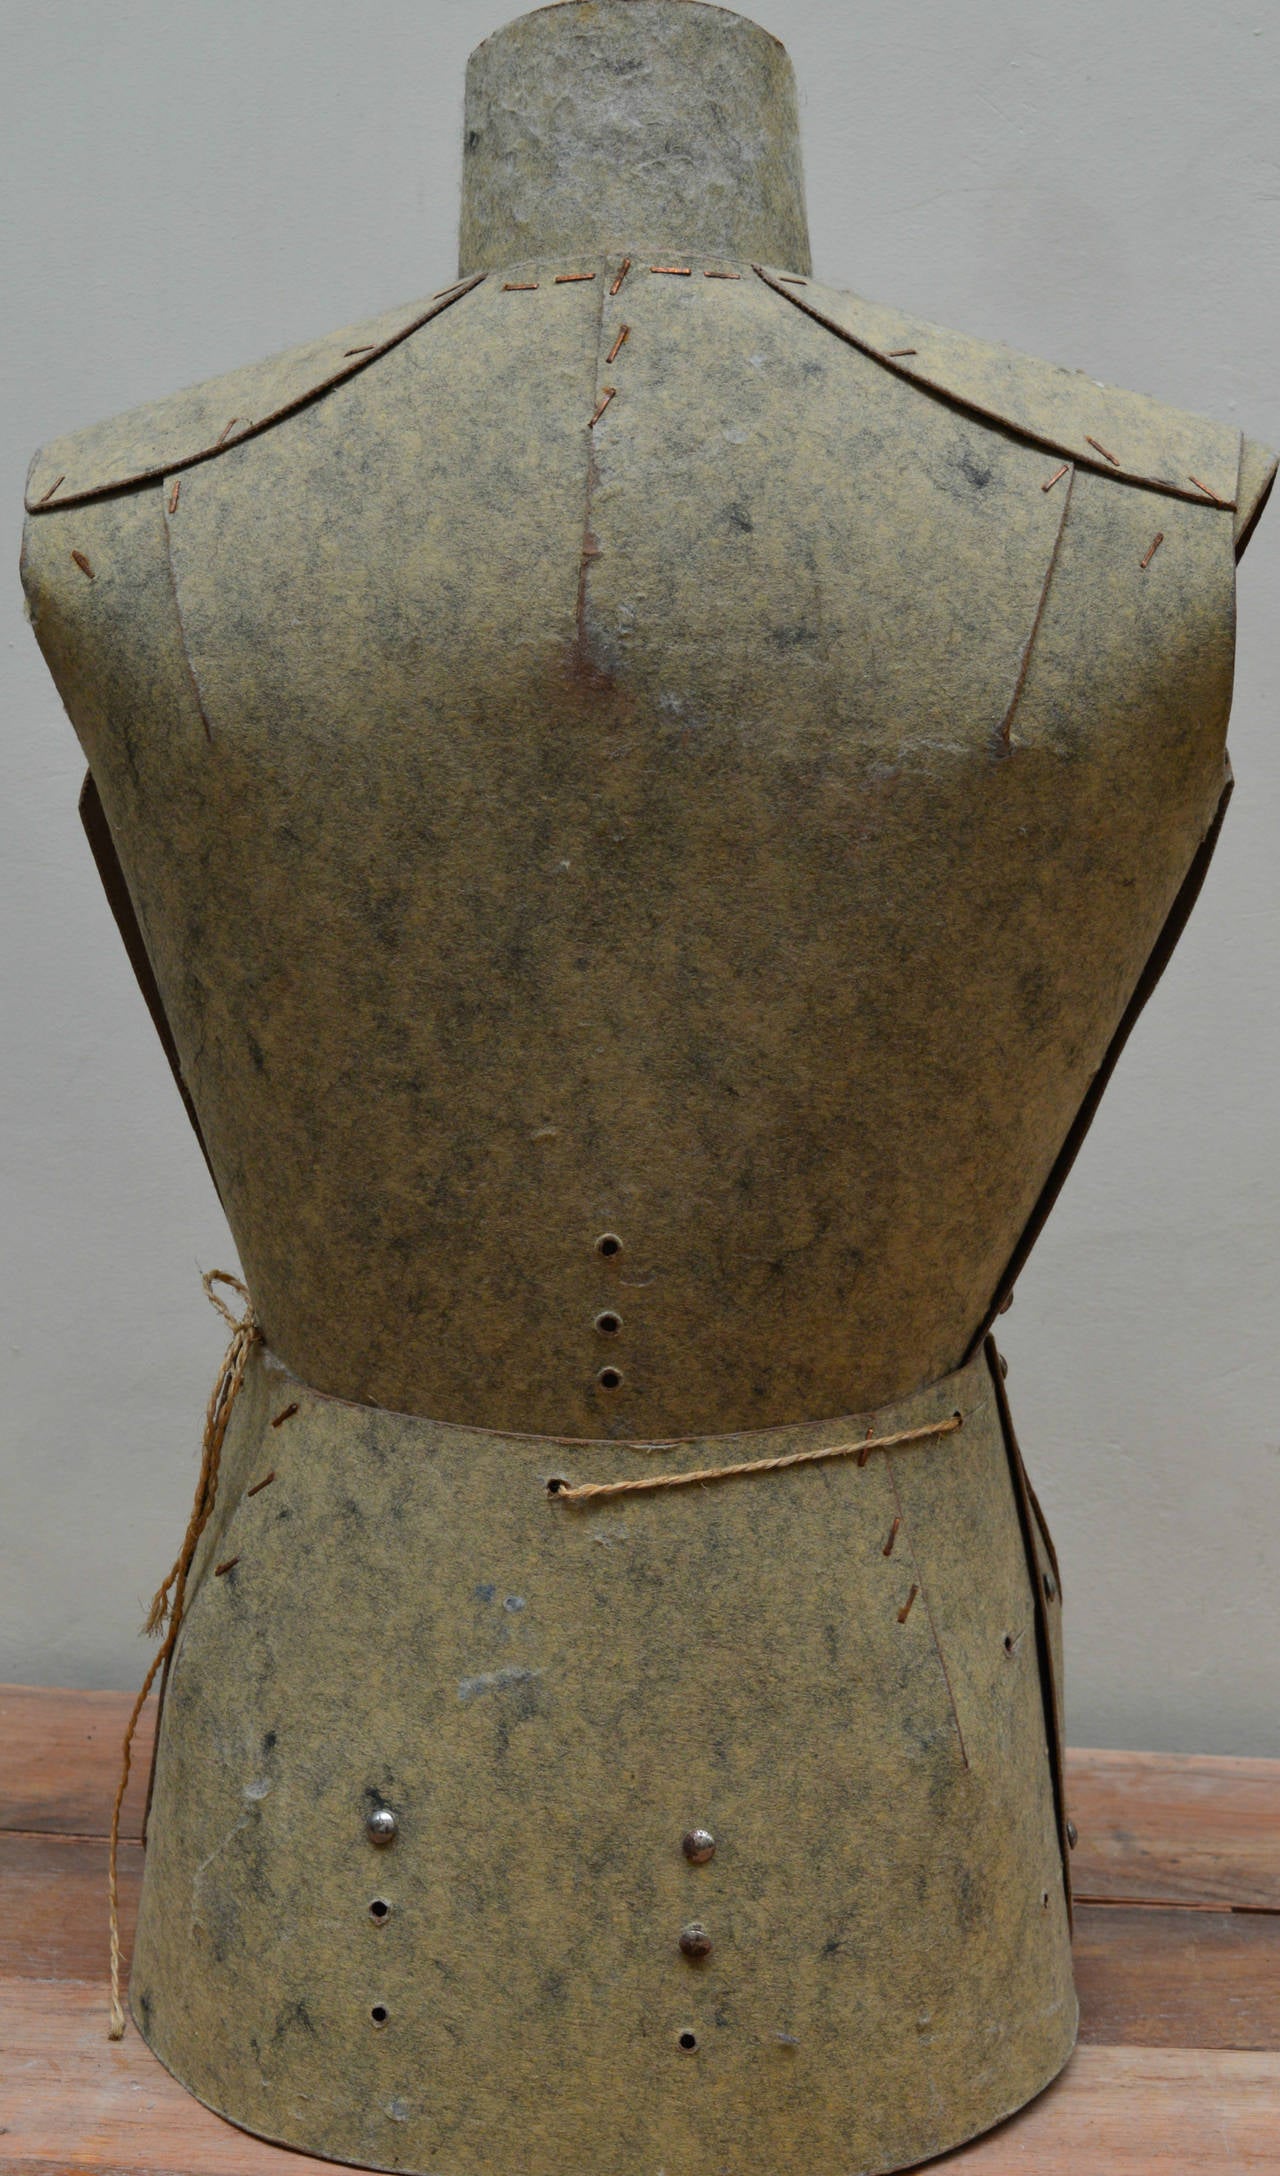 how to make a mannequin out of cardboard